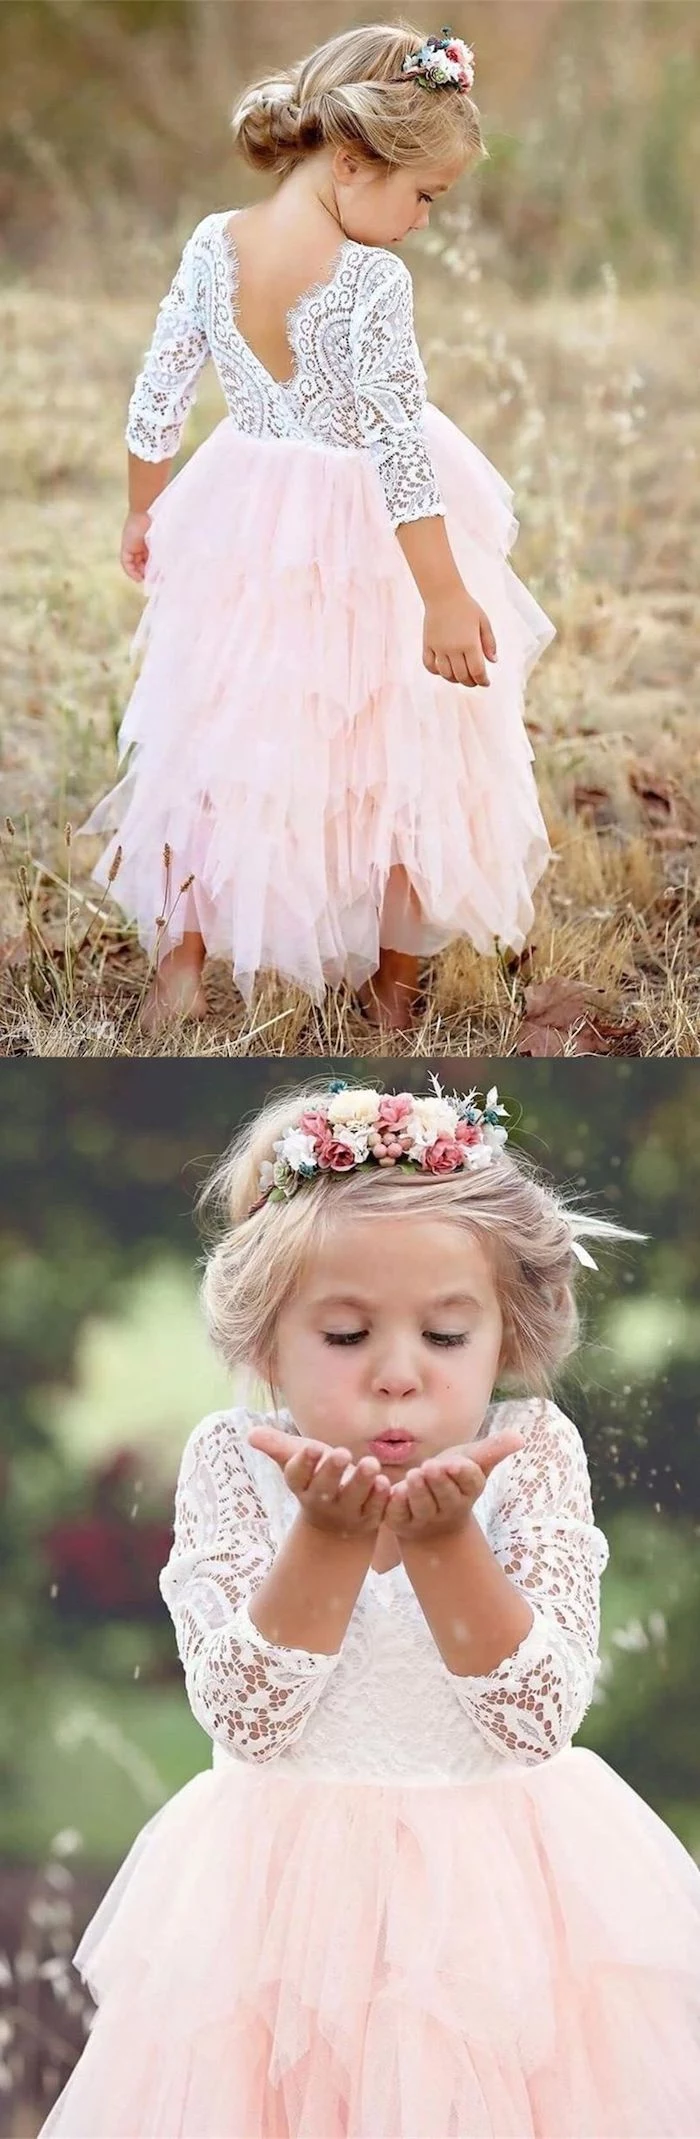 white lace top, pink tulle bottom, flower crown, flower girl dress, blonde hair, in a low updo